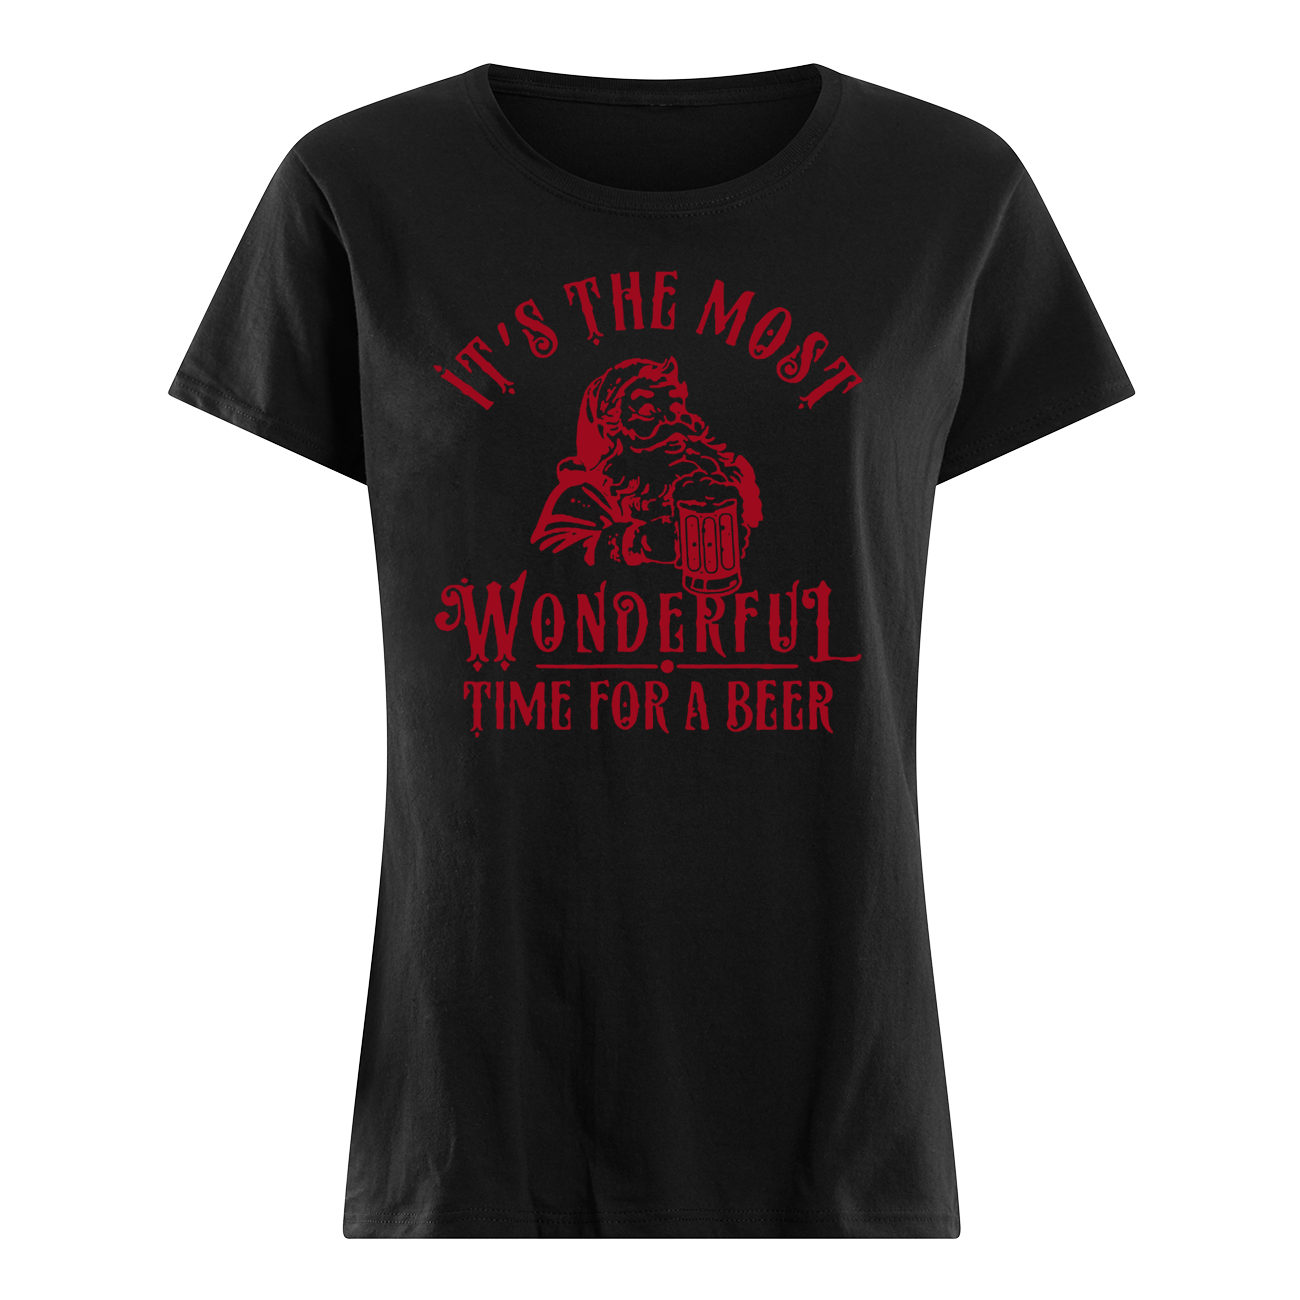 Santa claus it's the most wonderful time for a beer womens shirt